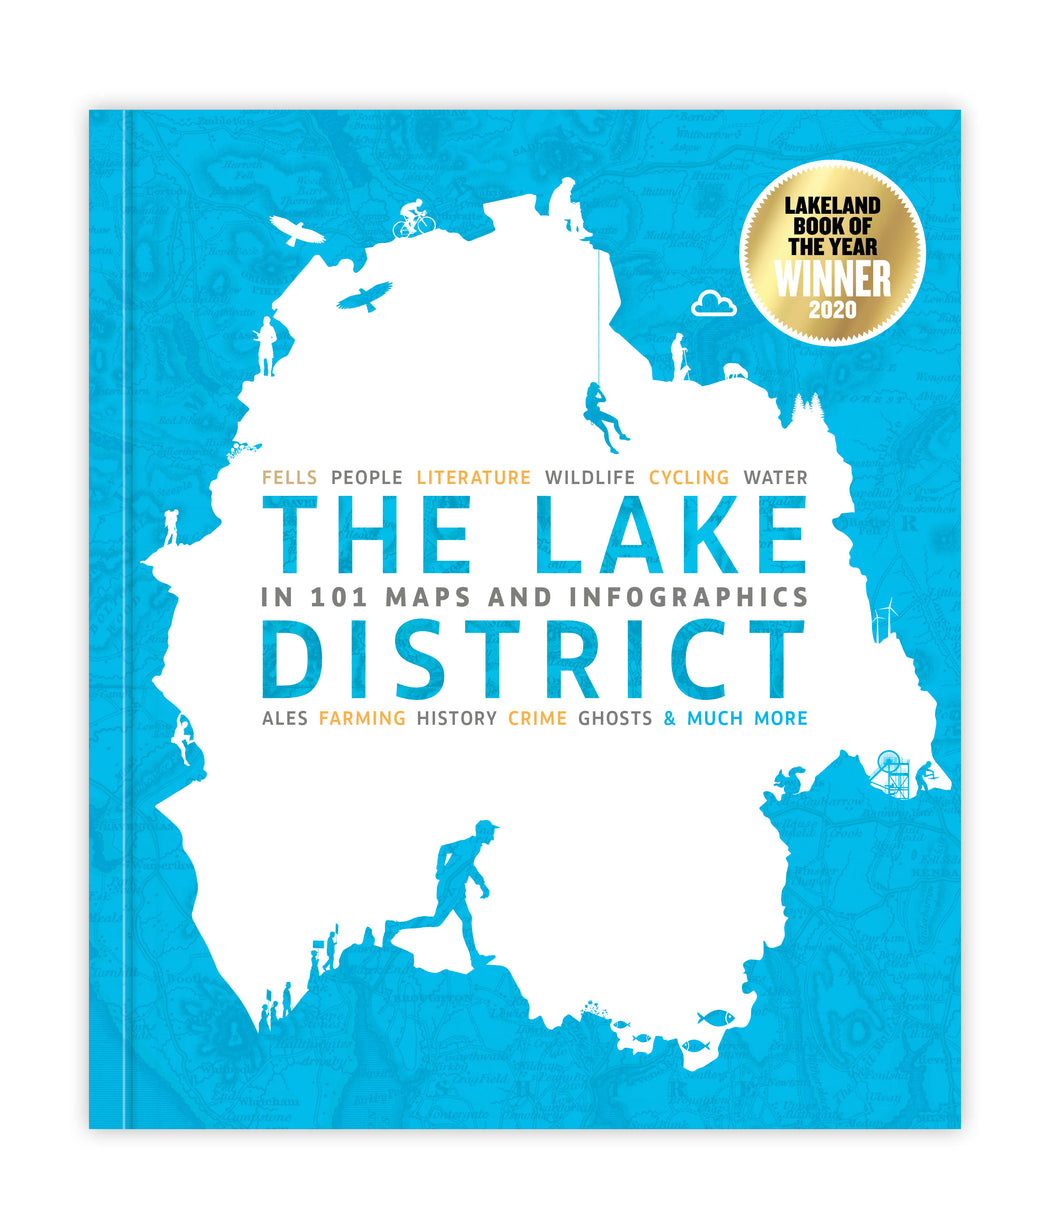 The Lake District in 101 Maps and Infographics